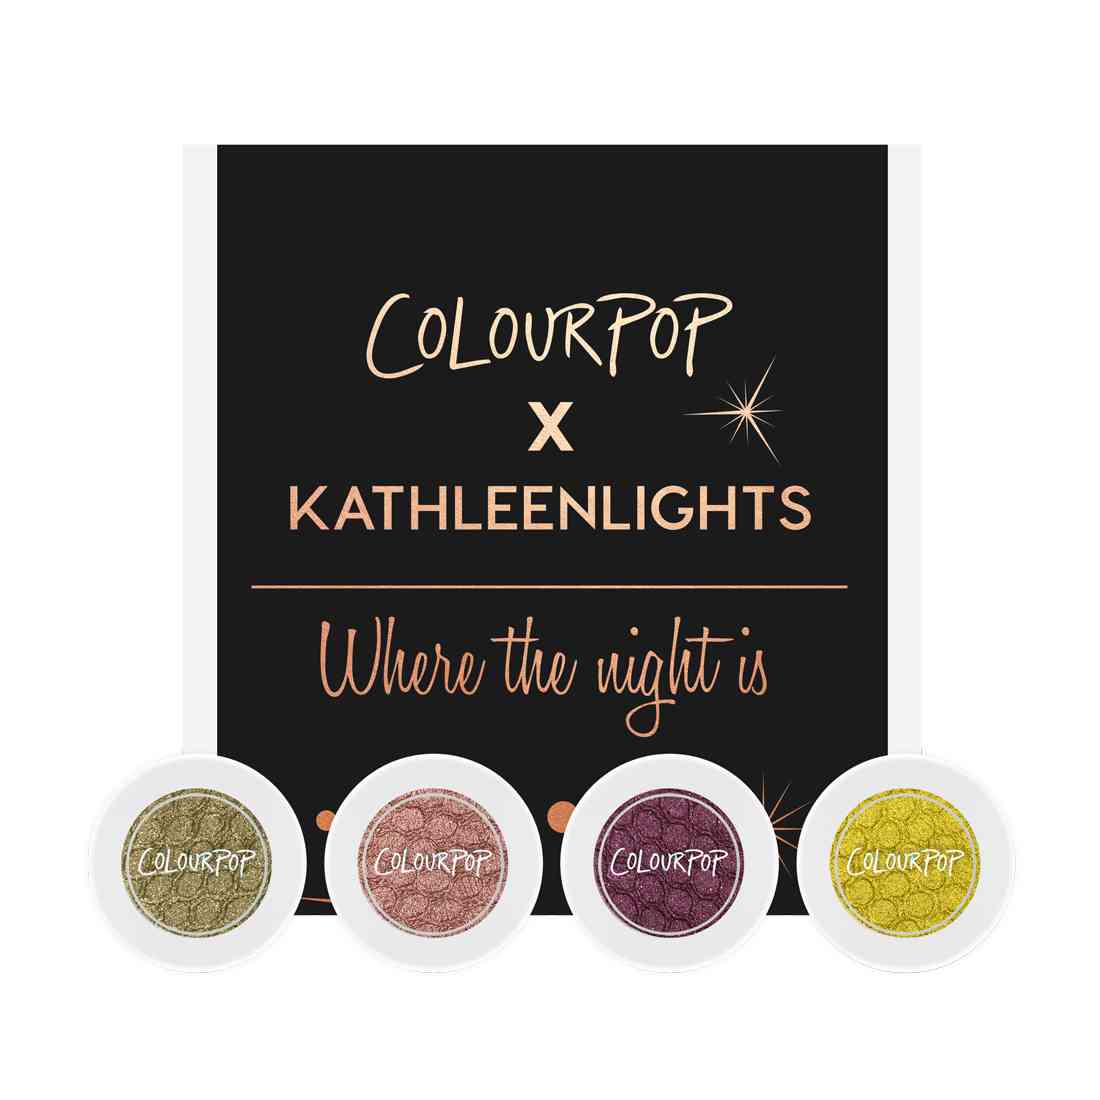 Colour pop x Kathleen lights where the night is